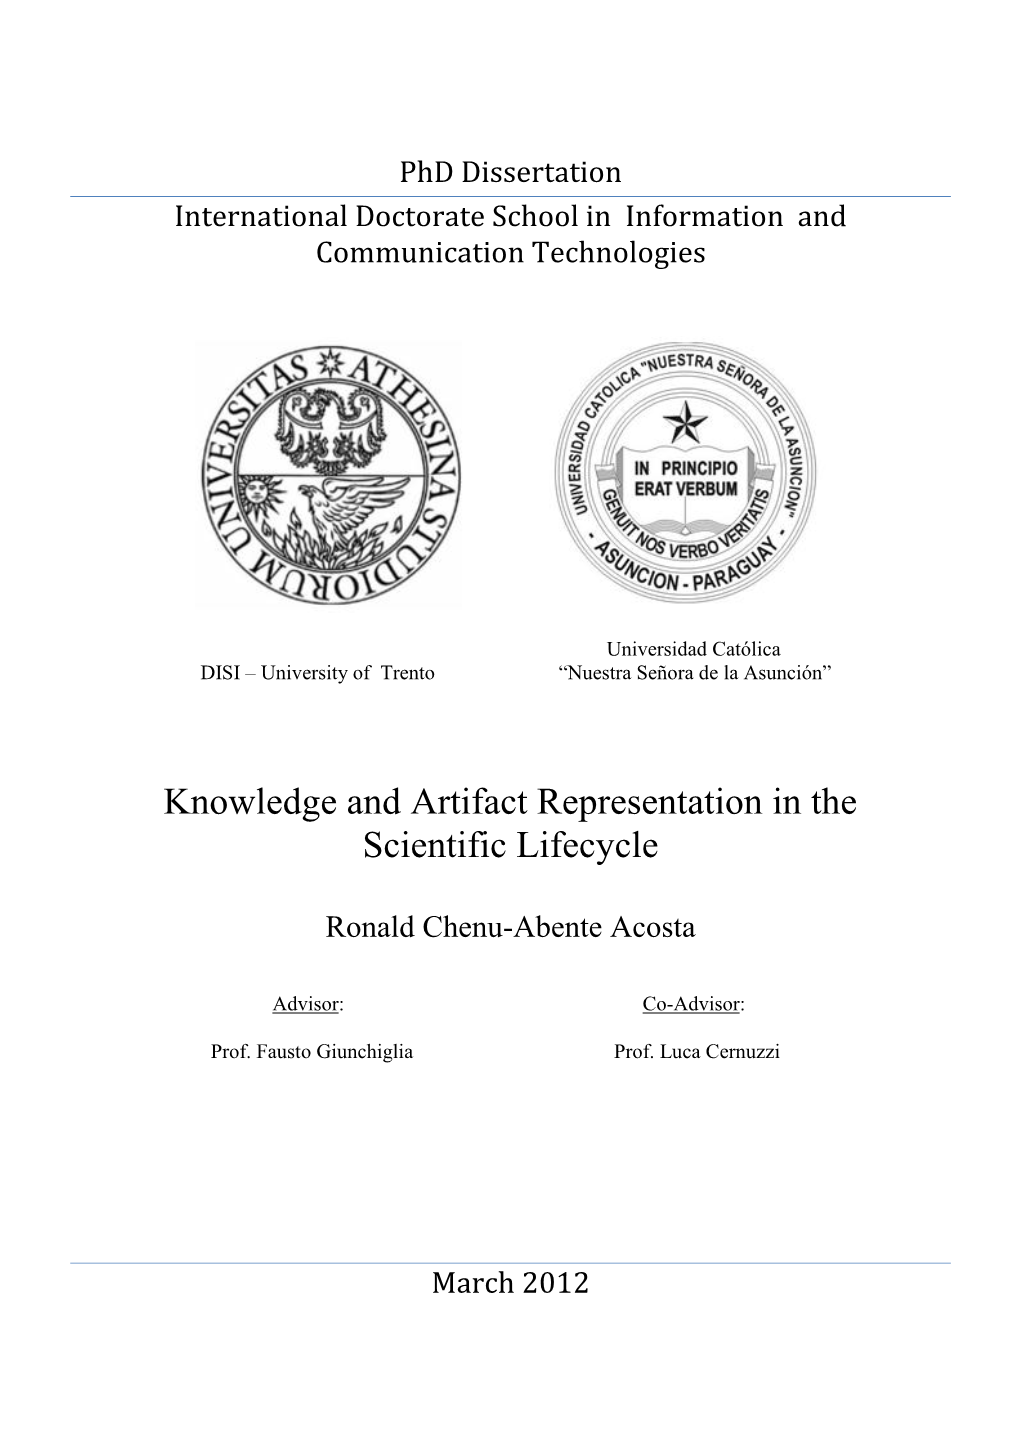 Knowledge and Artifact Representation in the Scientific Lifecycle